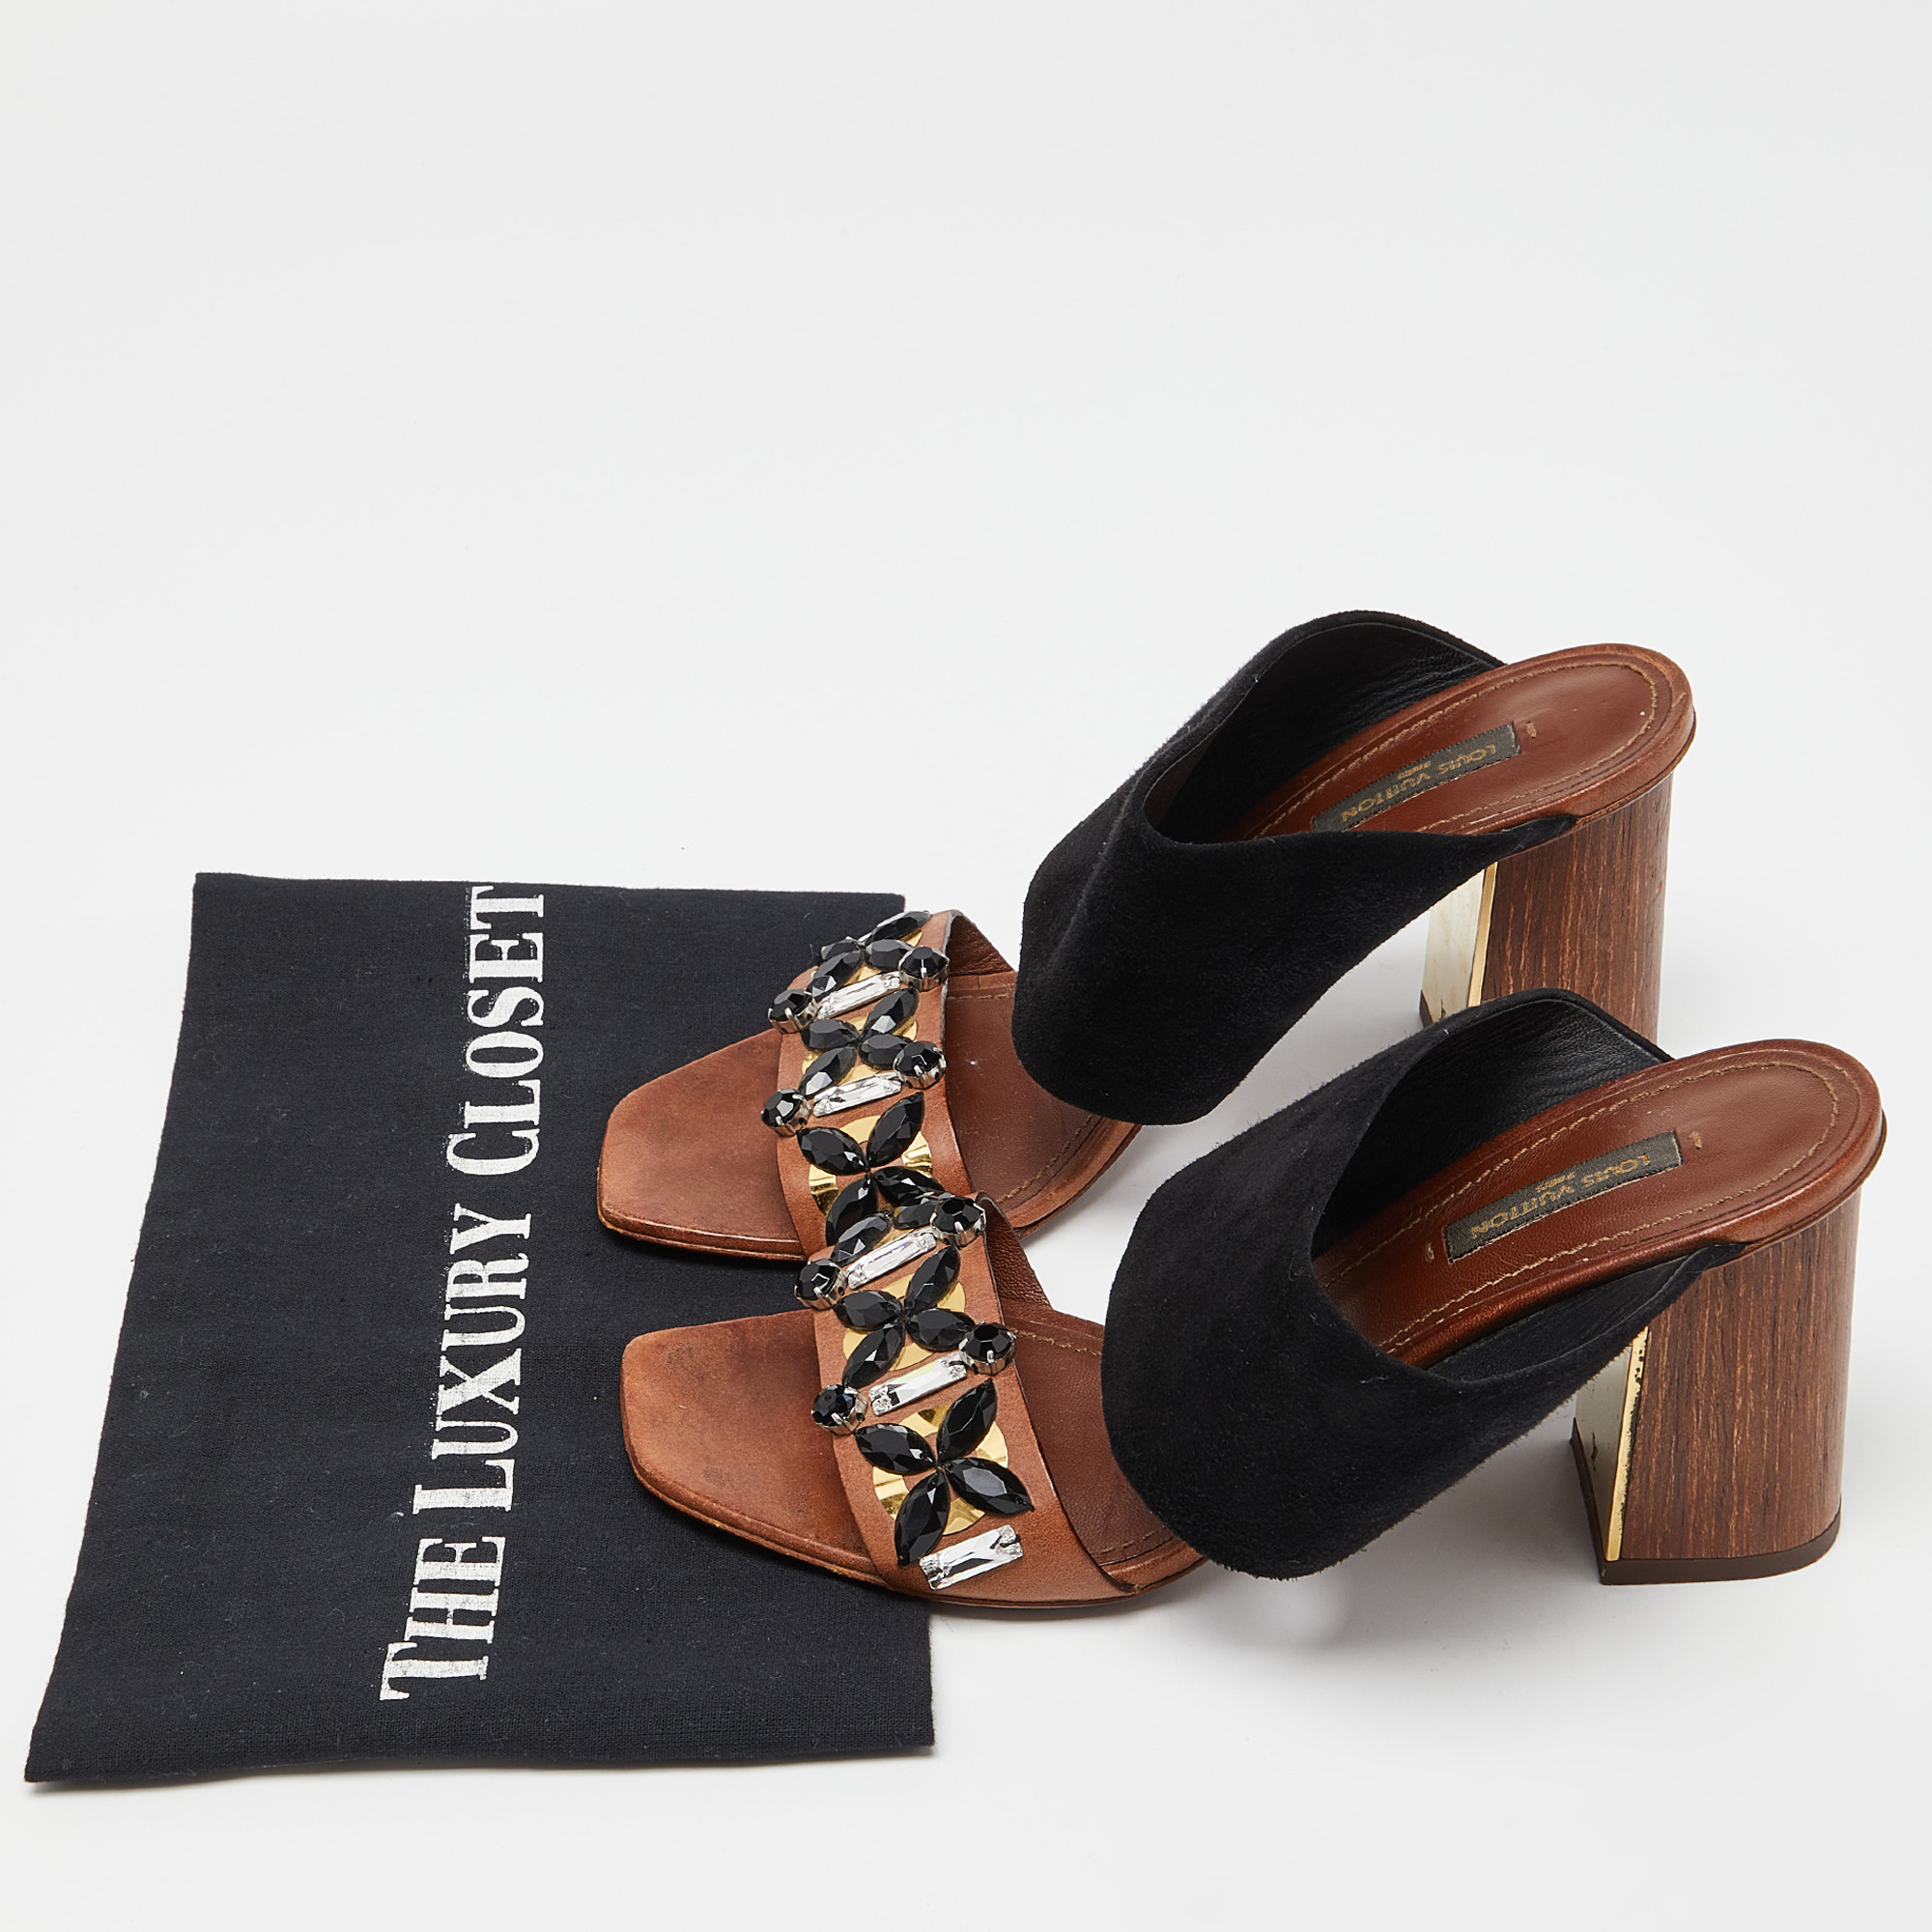 Louis Vuitton Brown Suede And Leather Embellished Slide Sandals Size 38